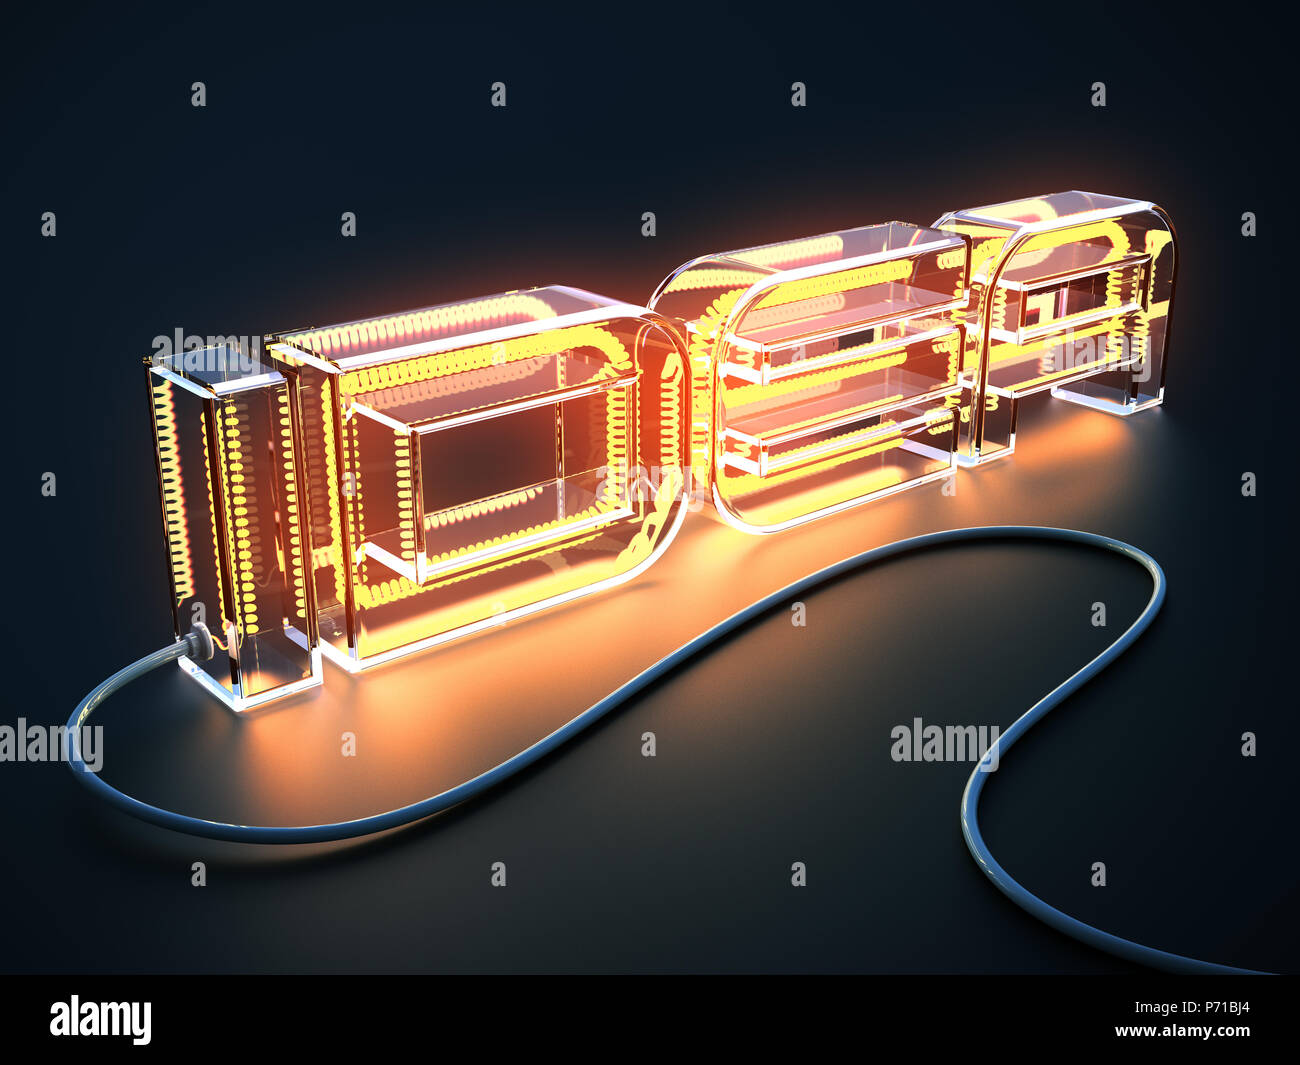 Concept Of The Text IDEA Made As An Electric Lamp. 3D Illustration. Stock Photo